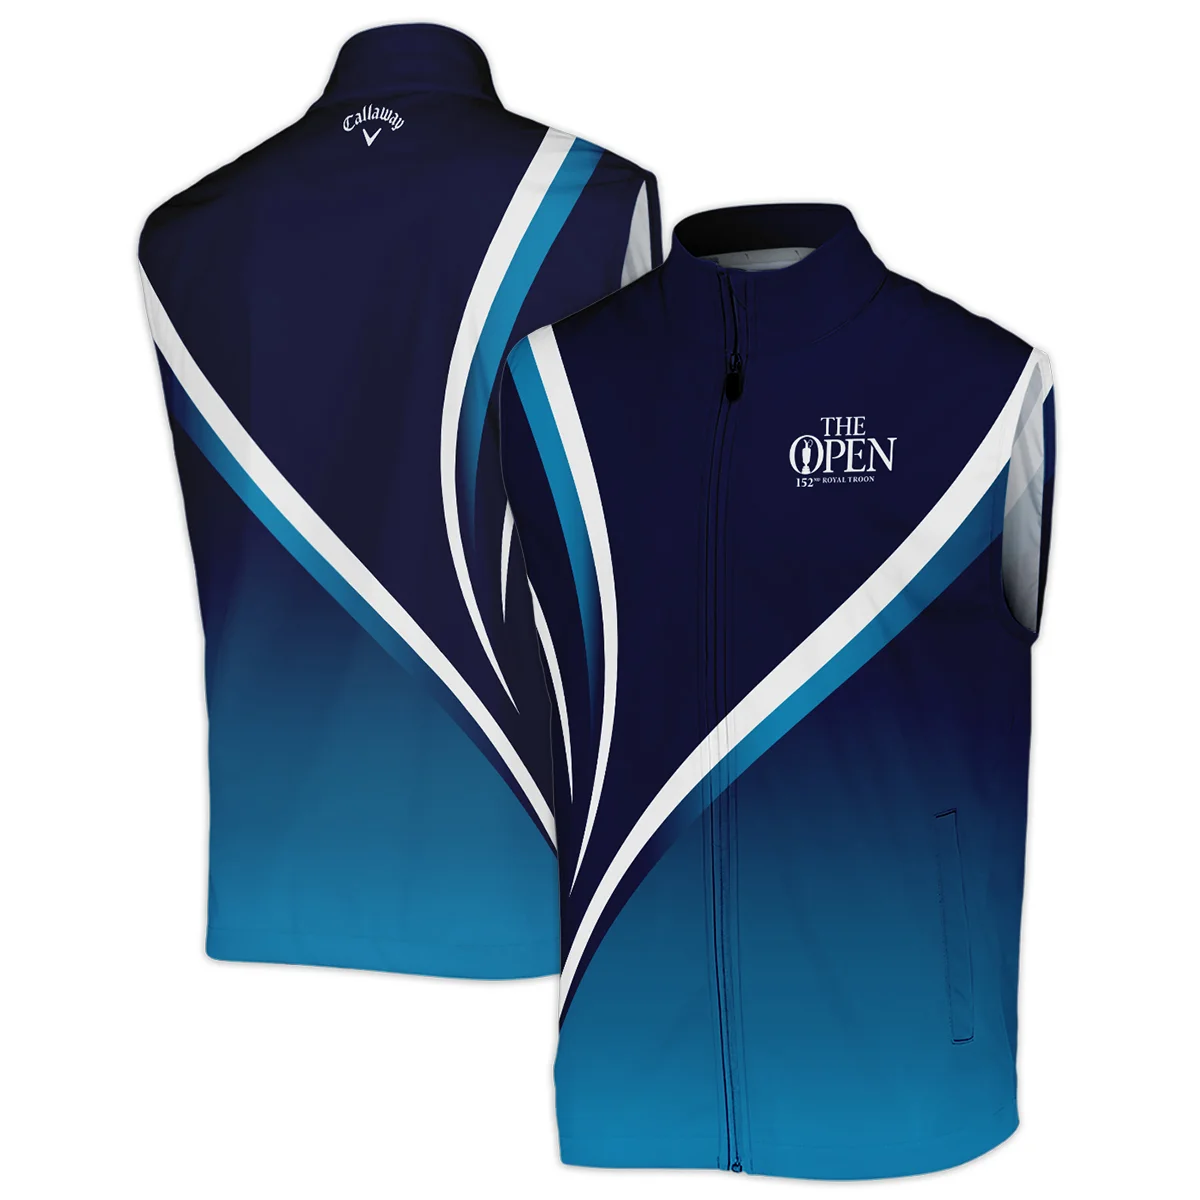 Callaway 152nd Open Championship Dark Blue Gradient White Abstract Background Sleeveless Jacket All Over Prints HOTOP260624A03CLWSJK